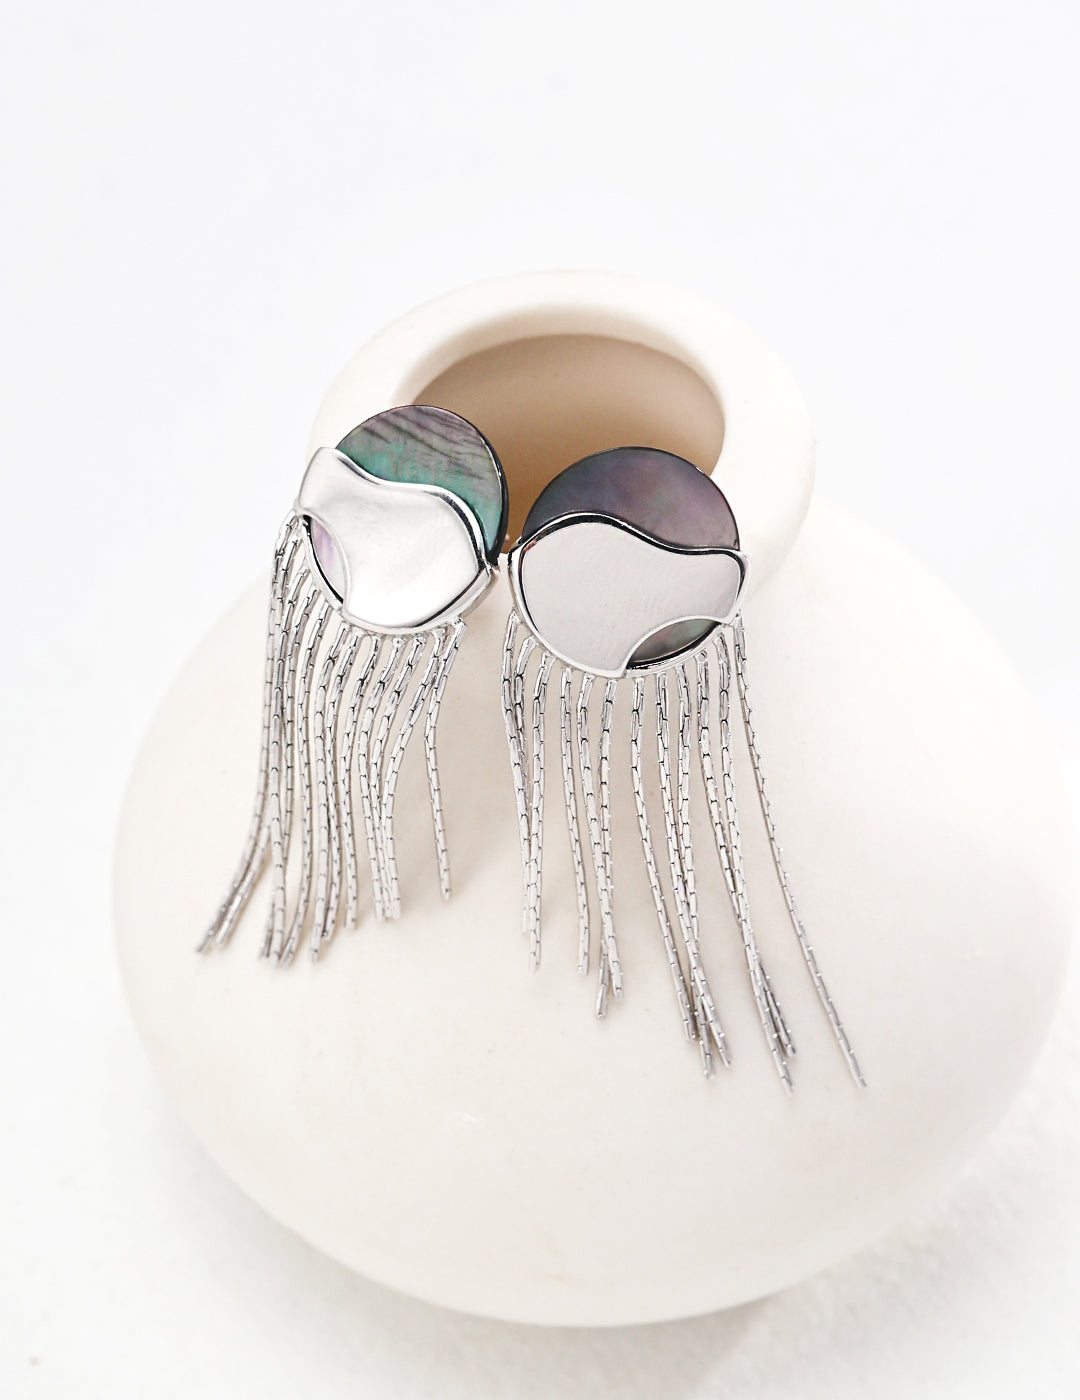 Minimalist 925 Sterling Silver Shell Drop Earrings with Mother-of-Pearl Accents